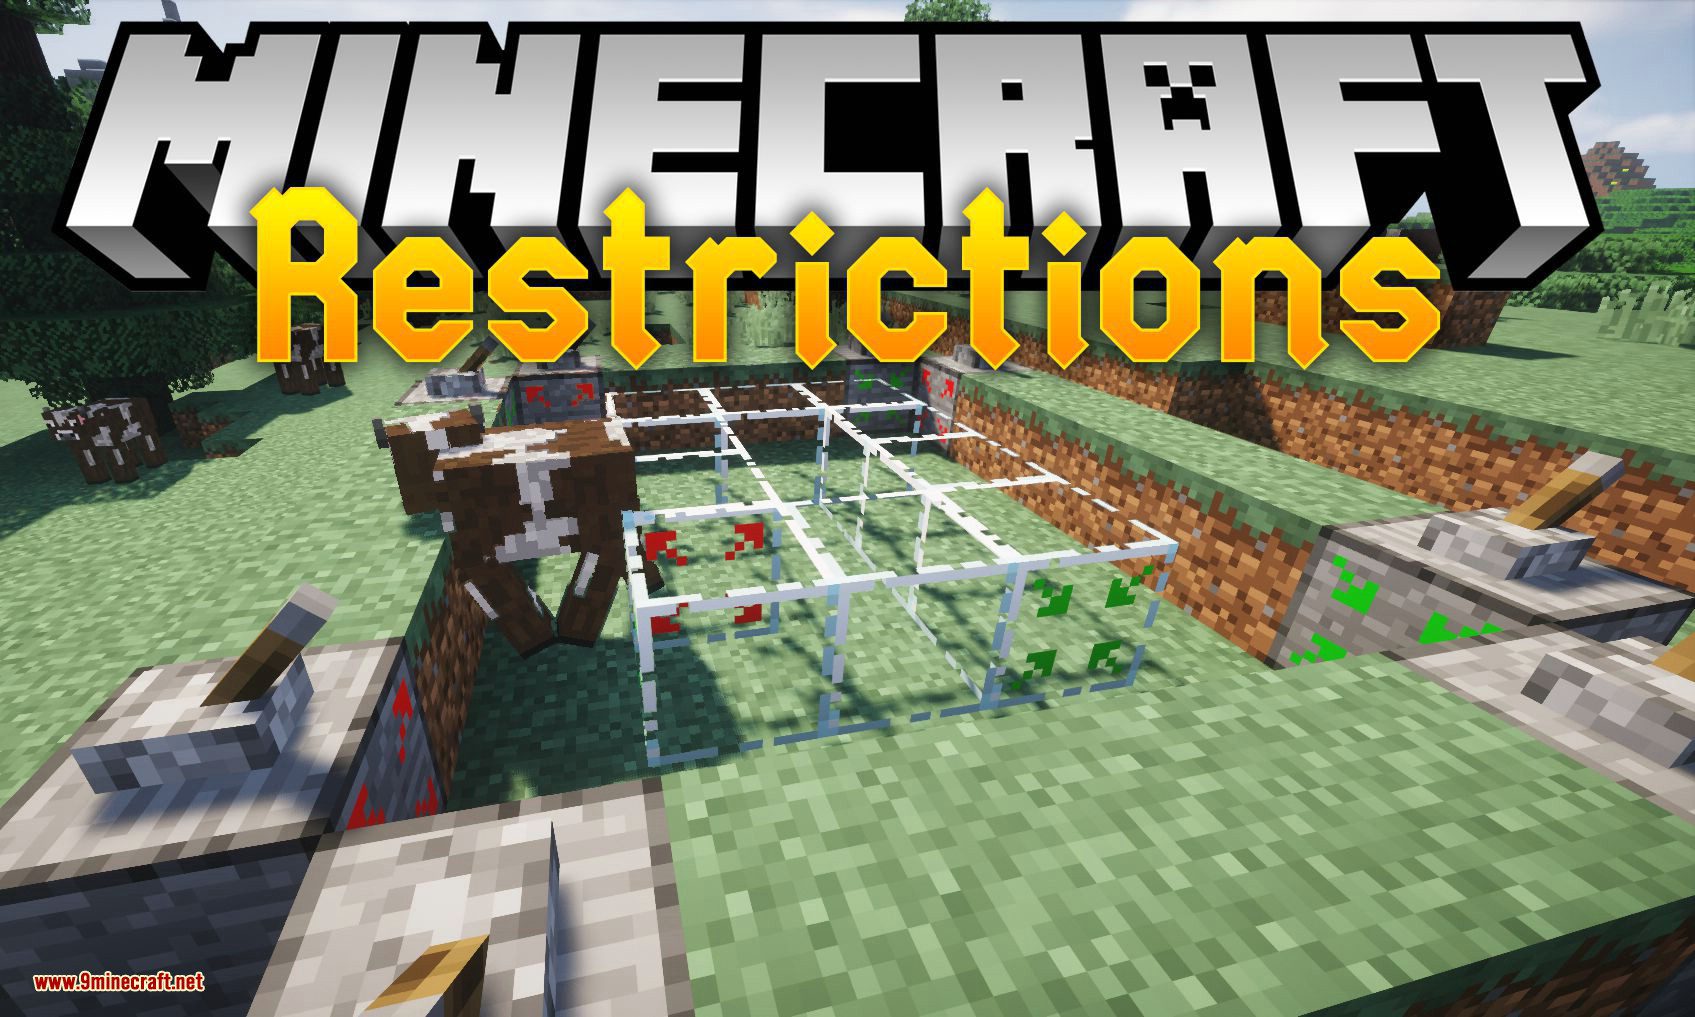 Restrictions mod for minecraft logo